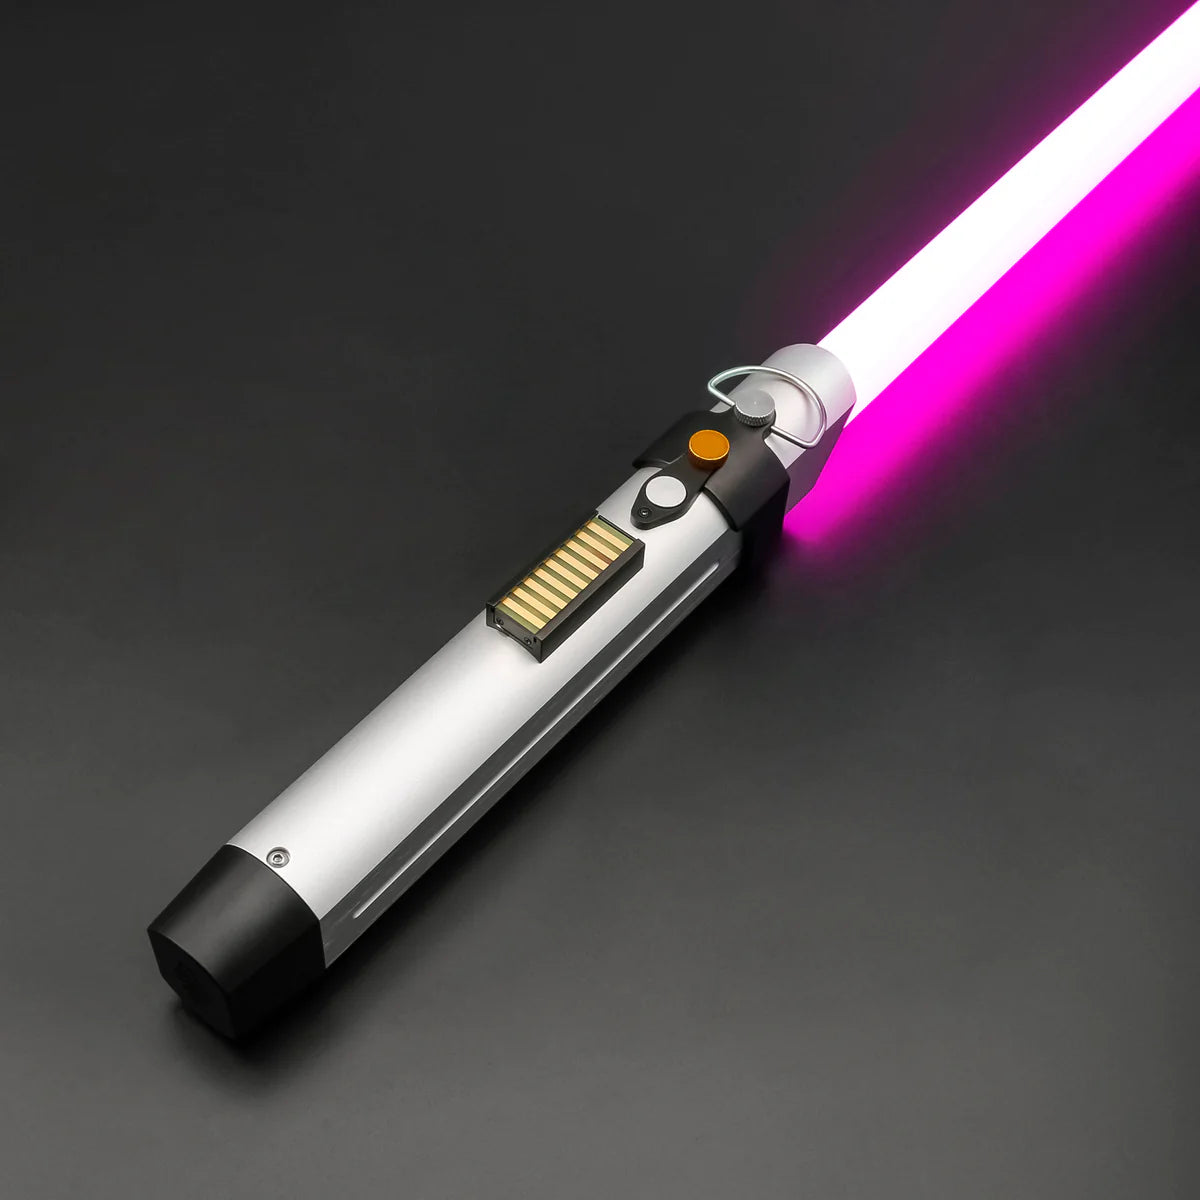 THE ATTACK OF ANAKIN DX SABER